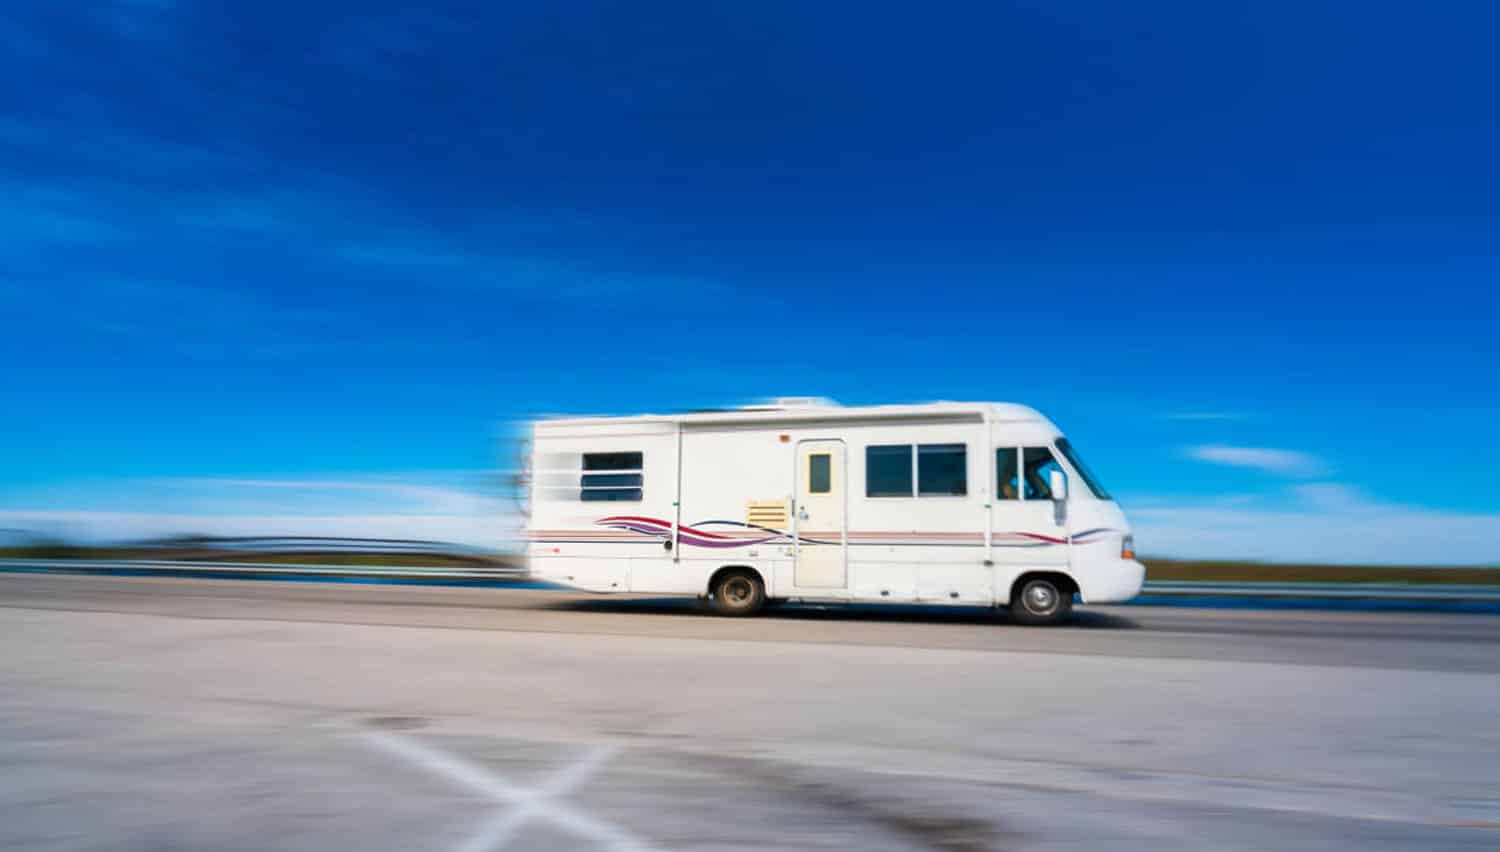 Is it legal to sleep in an RV while driving